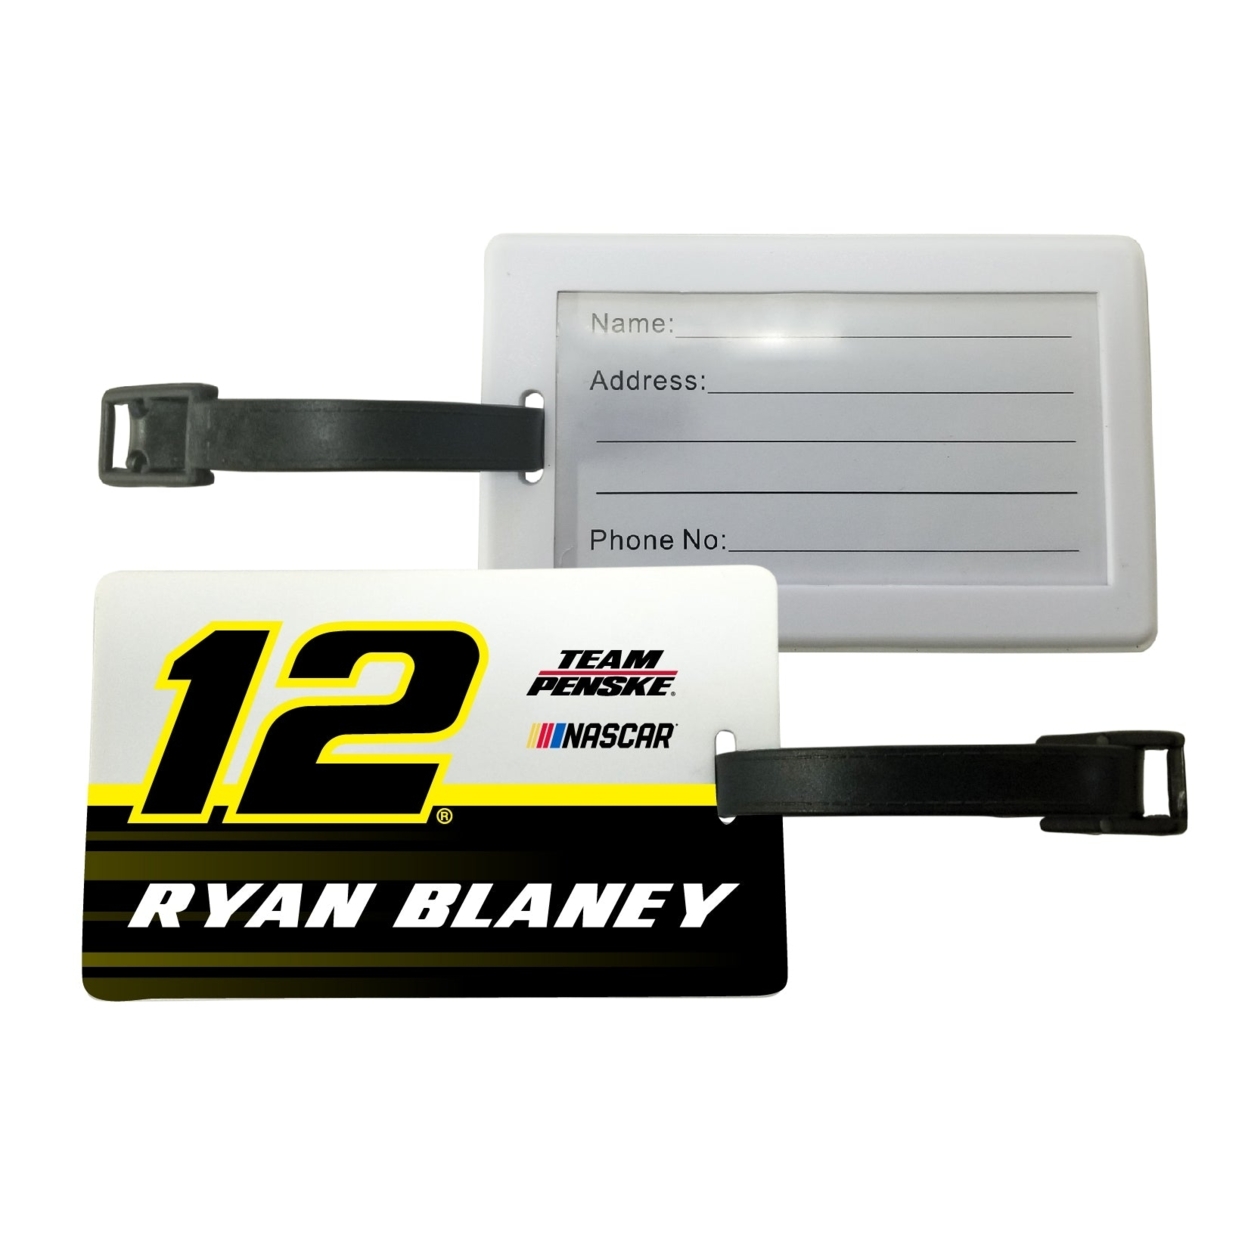 #12 Ryan Blaney Officially Licensed Luggage Tag